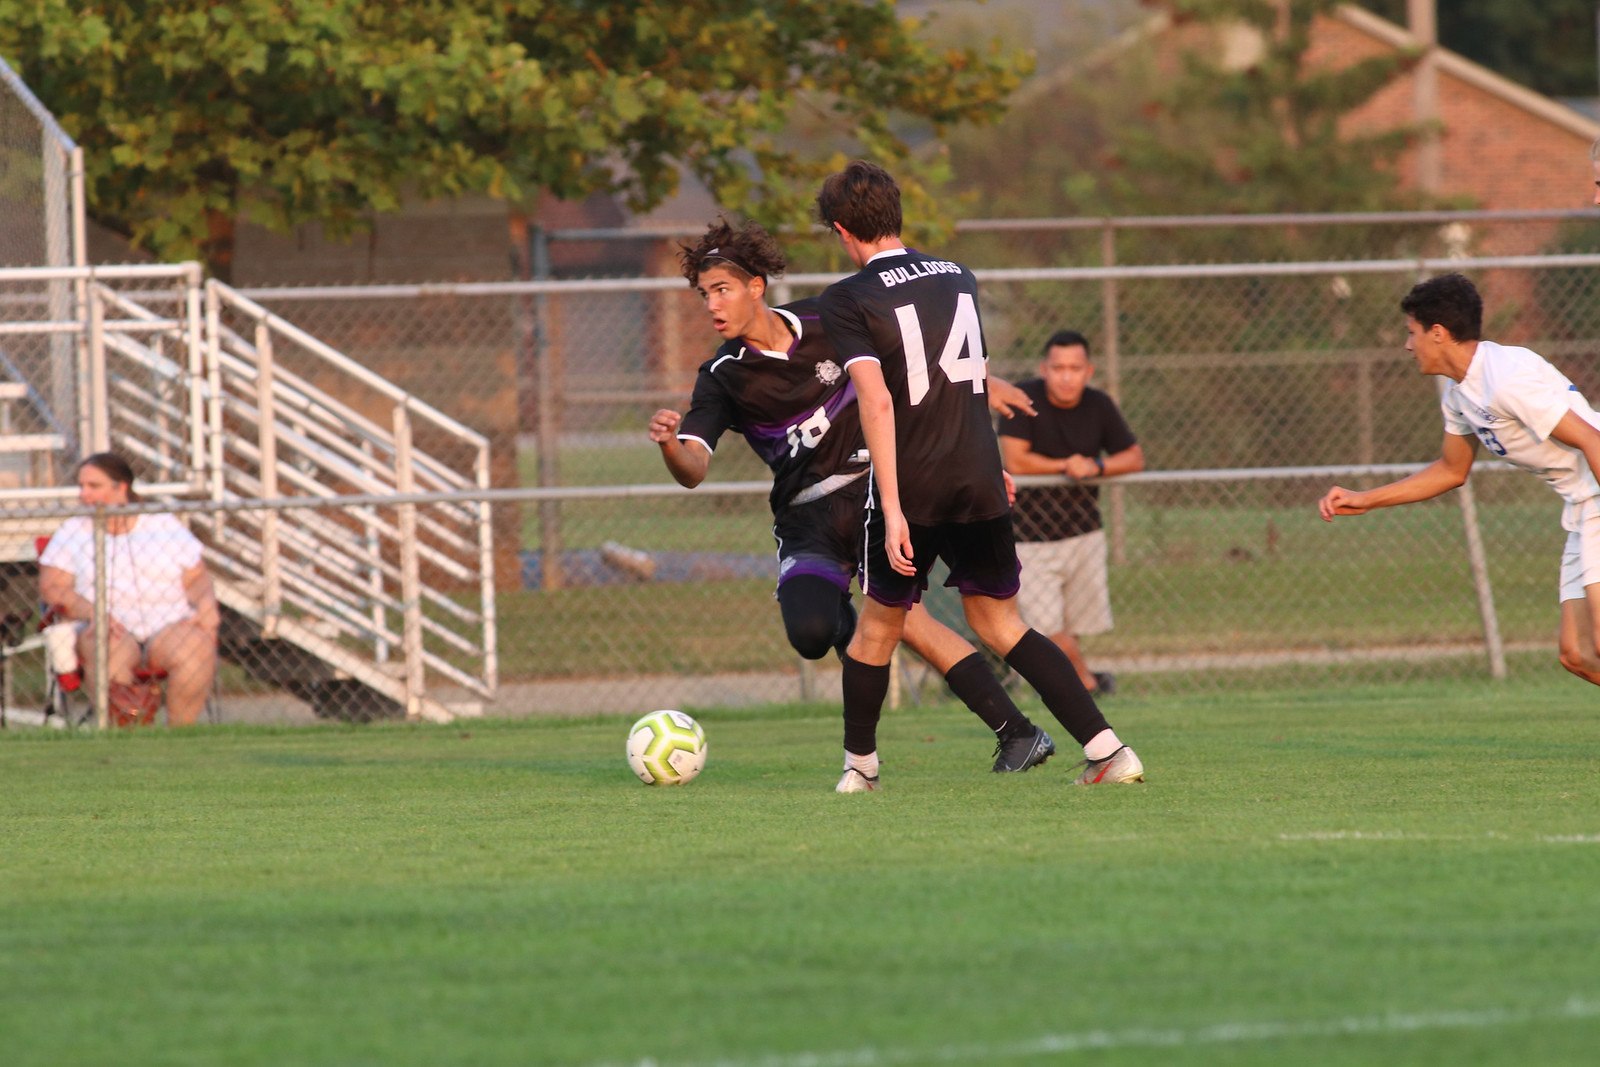 Boys' Soccer plays to 2-2 draw with No. 1 Noblesville to end regular season